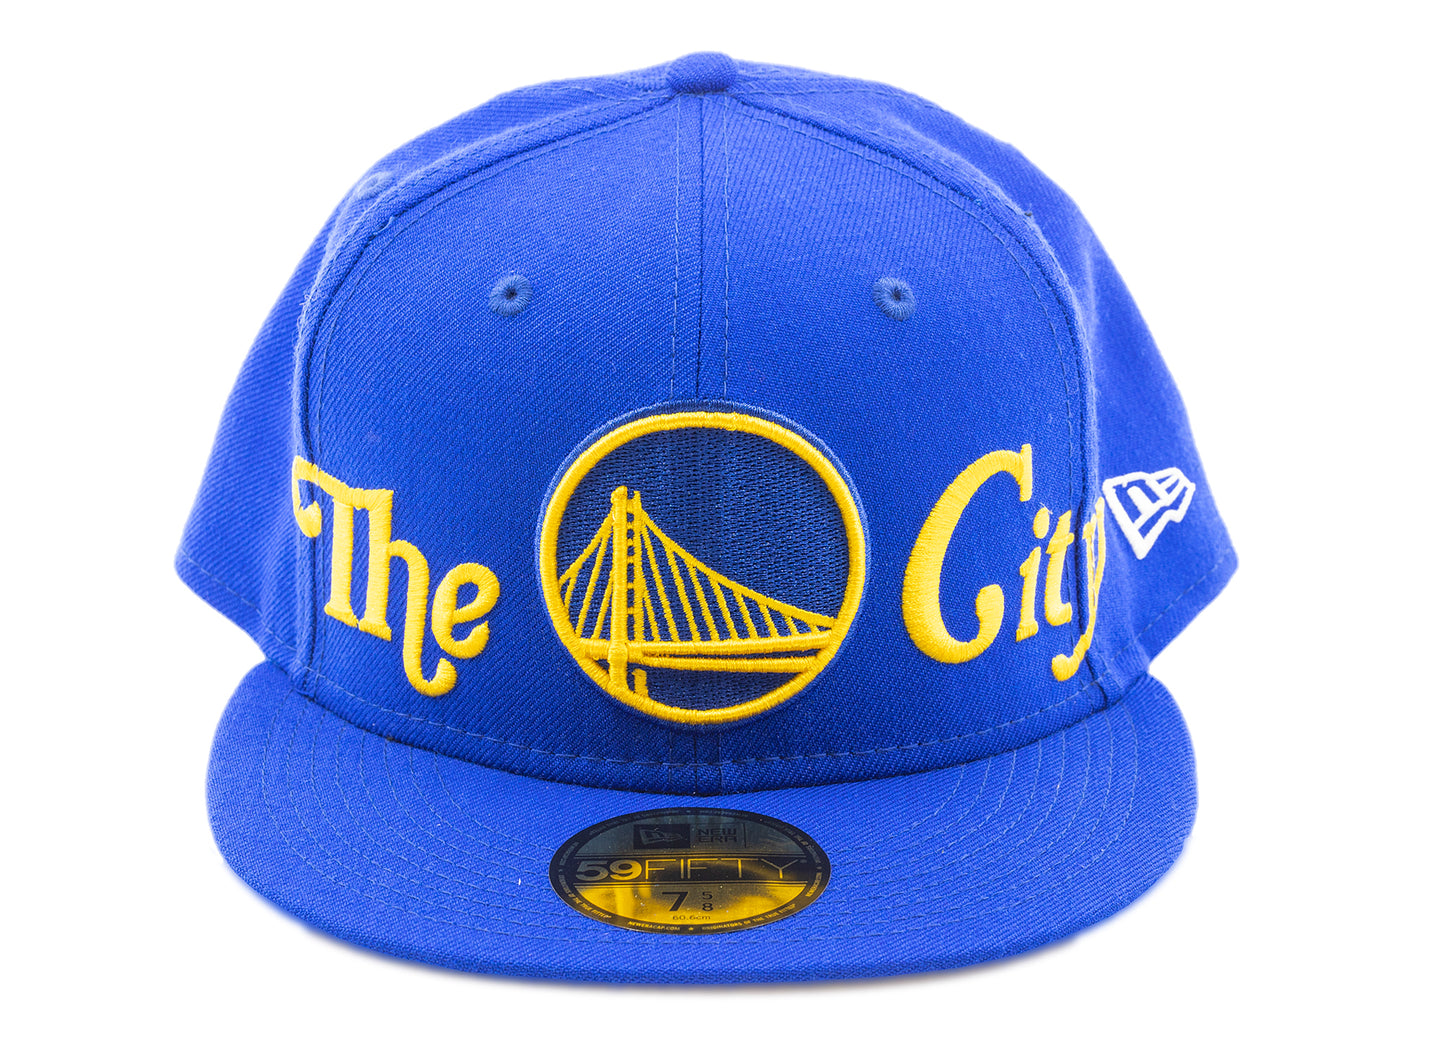 New Era Golden State Warriors 59FIFTY Fitted Hat, Men's, Size 7 1/2, Blue